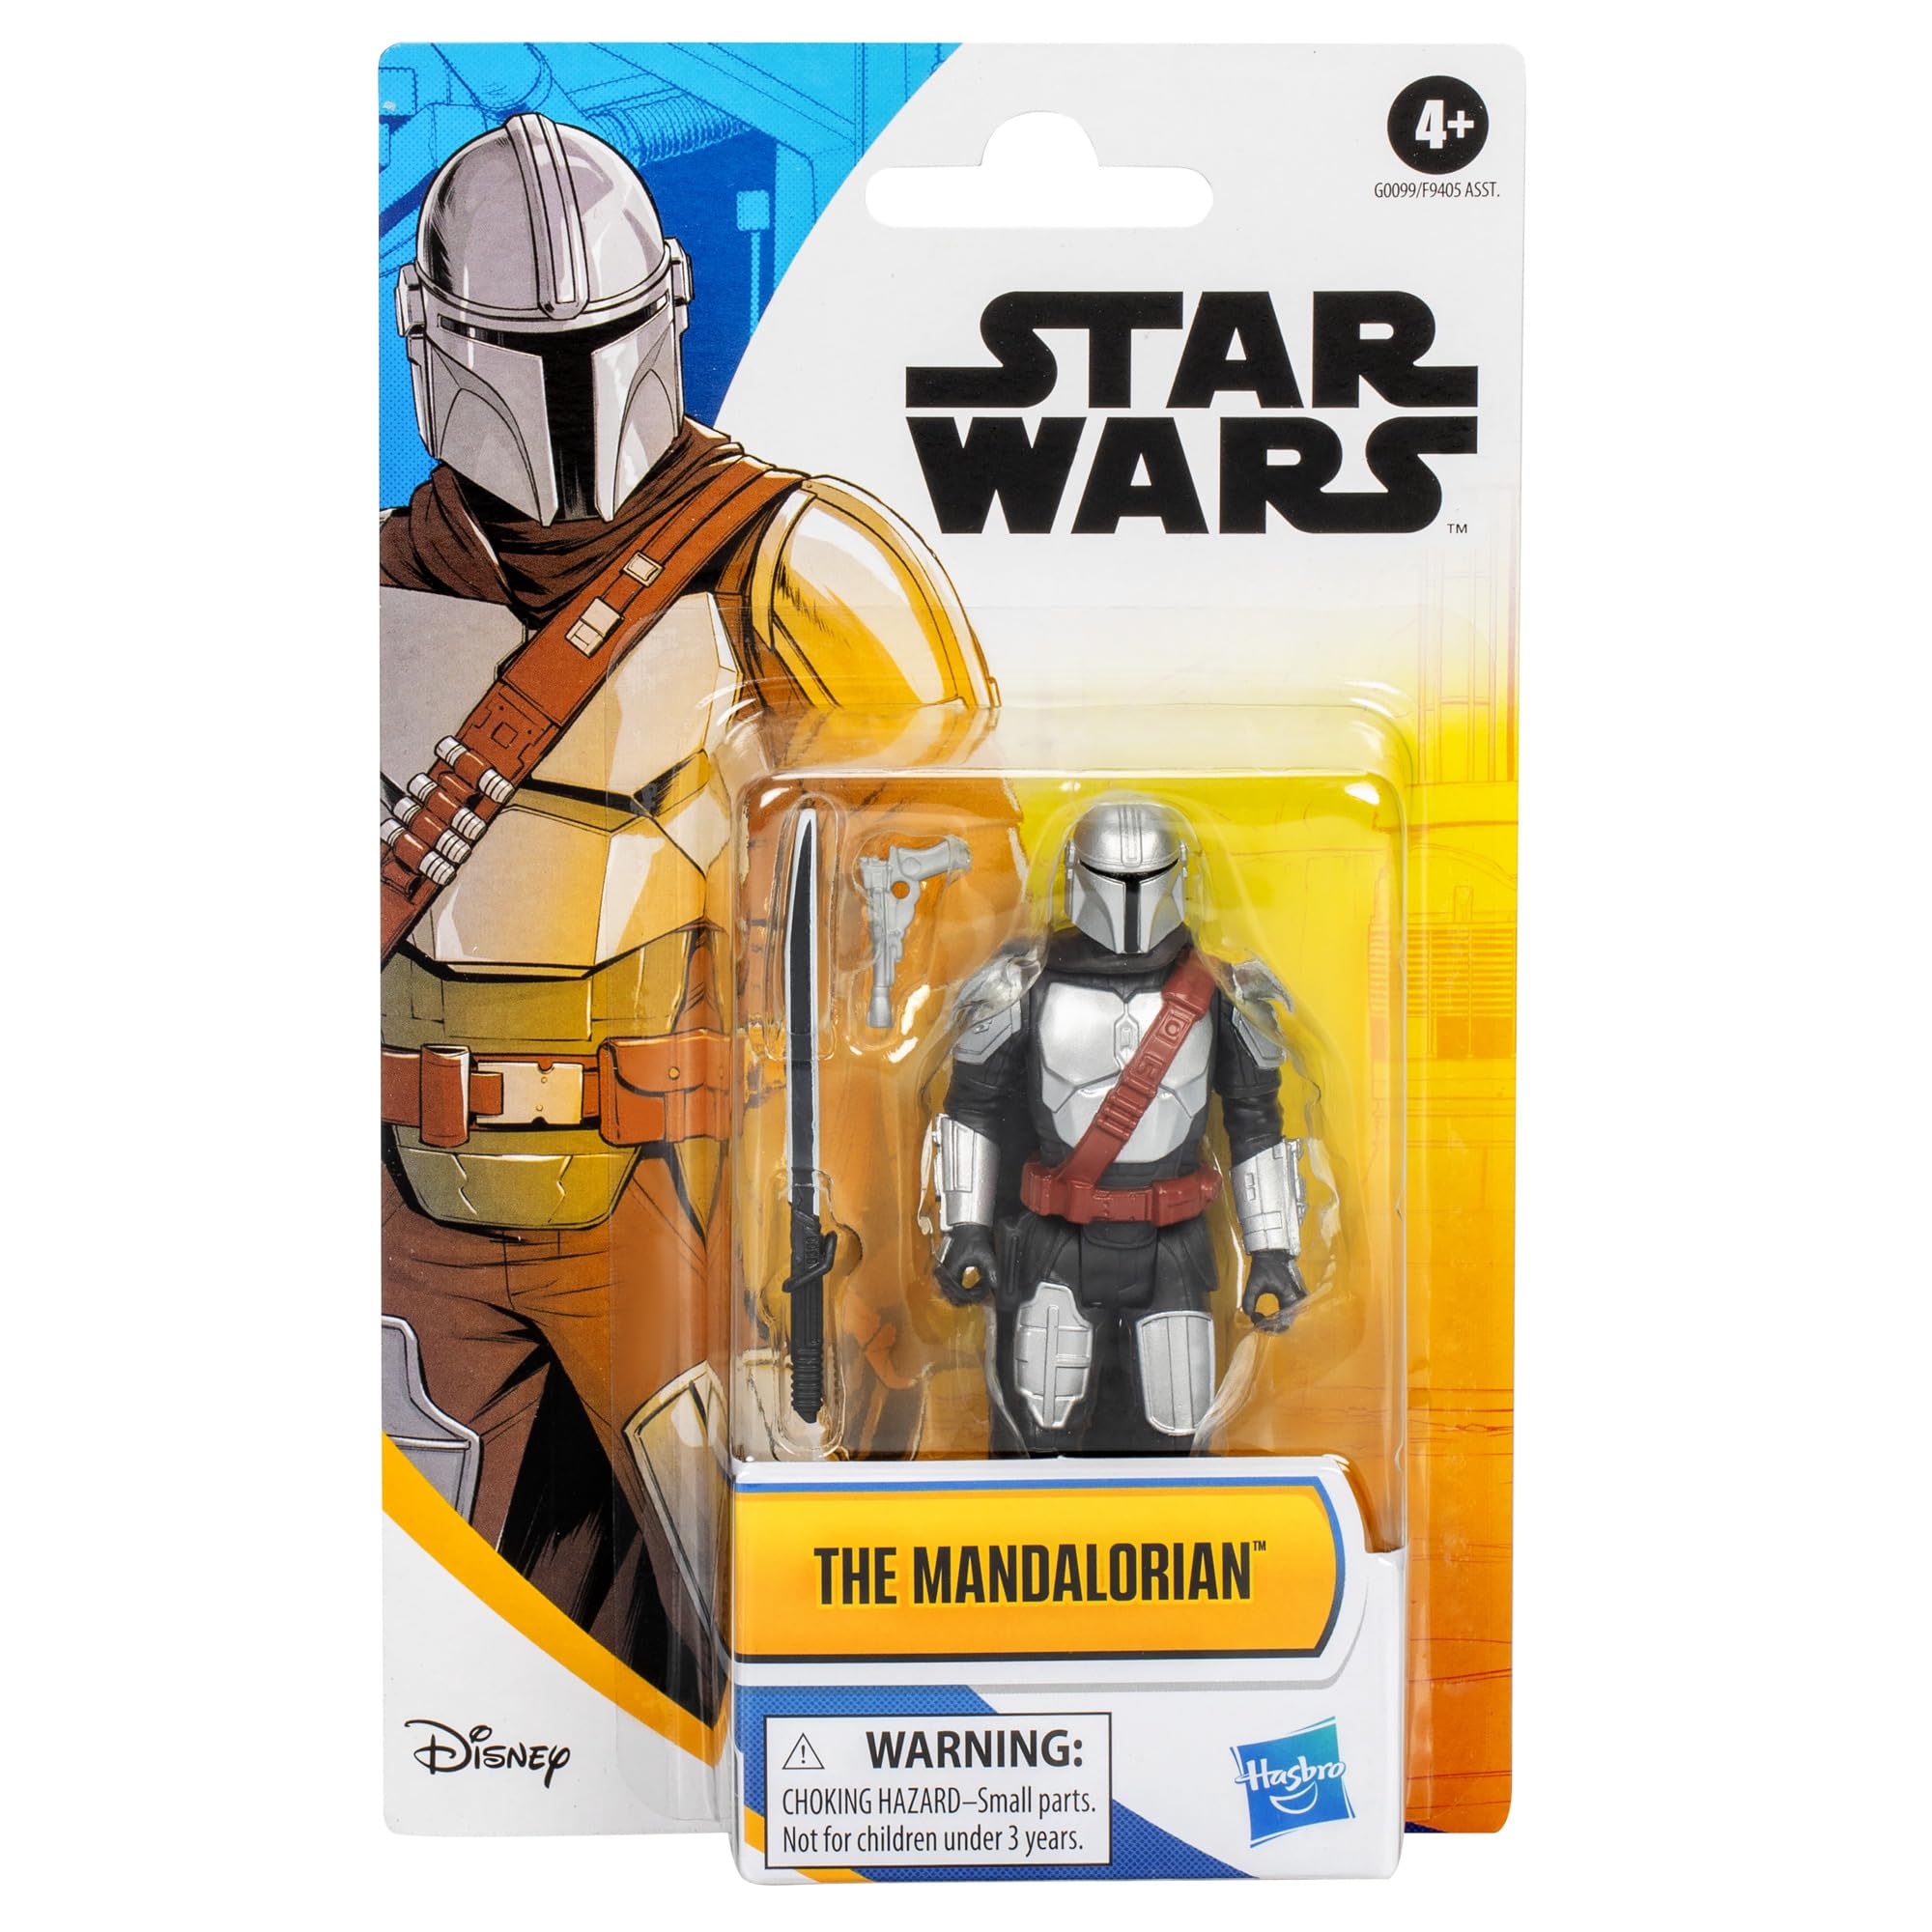 STAR WARS Epic Hero Series The Mandalorian 4-Inch Action Figure & 2 Accessories, Toys for 4 Year Old Boys and Girls